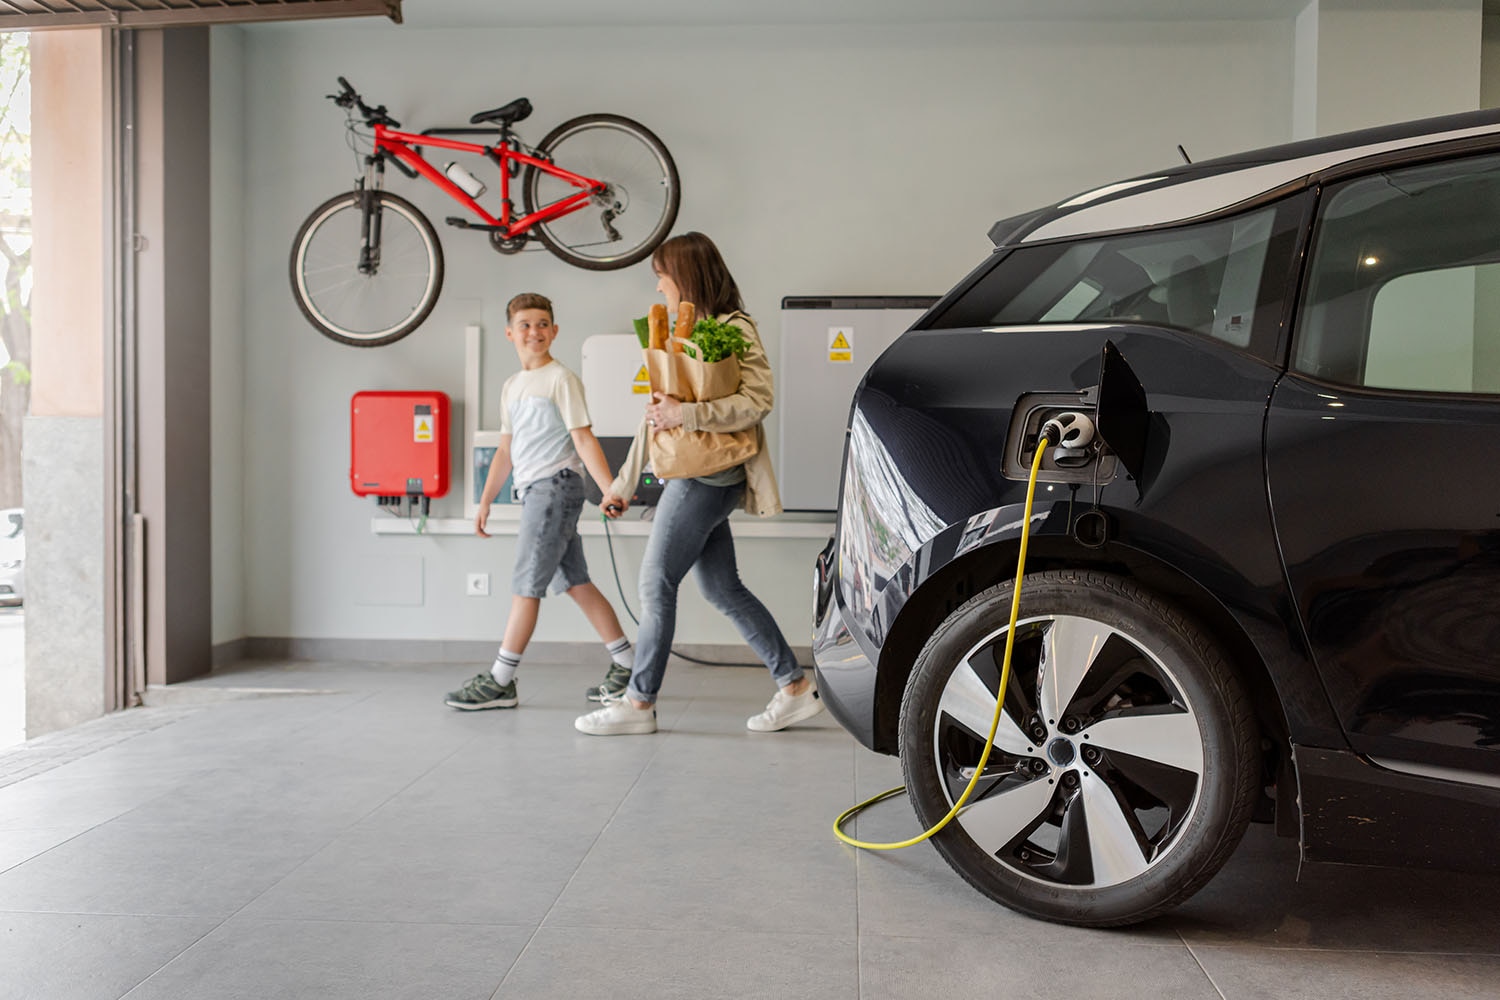 Parent and child in garage next to plugged-in electric vehicle